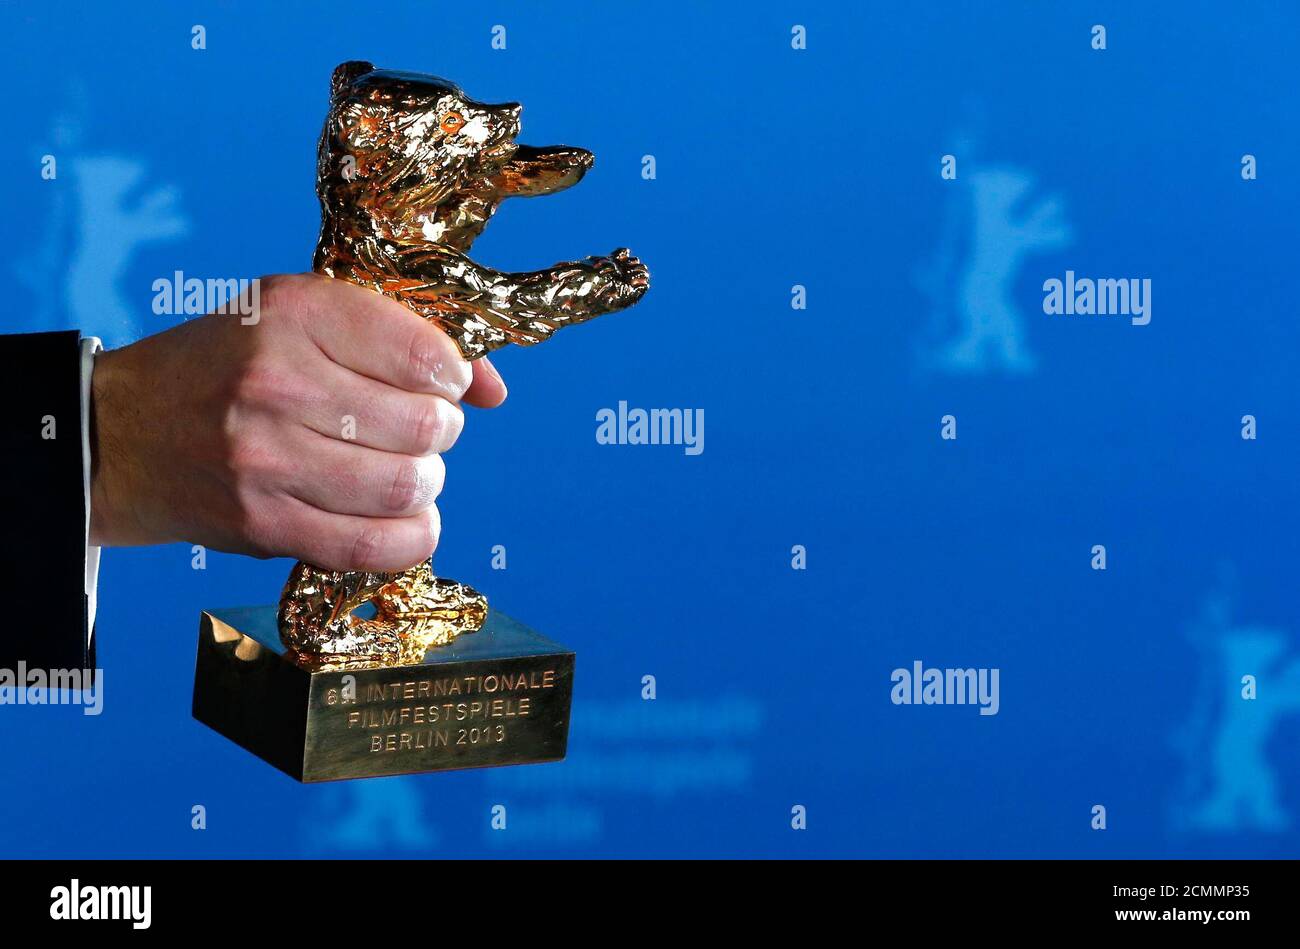 The Golden Bear award for the Best Film is held by winner Calin Peter Netzer for the film 'Pozi?ia Copilului' (Child's Pose) at the 63rd Berlinale International Film Festival in Berlin February 16, 2013. REUTERS/Thomas Peter (GERMANY  - Tags: ENTERTAINMENT) Stock Photo